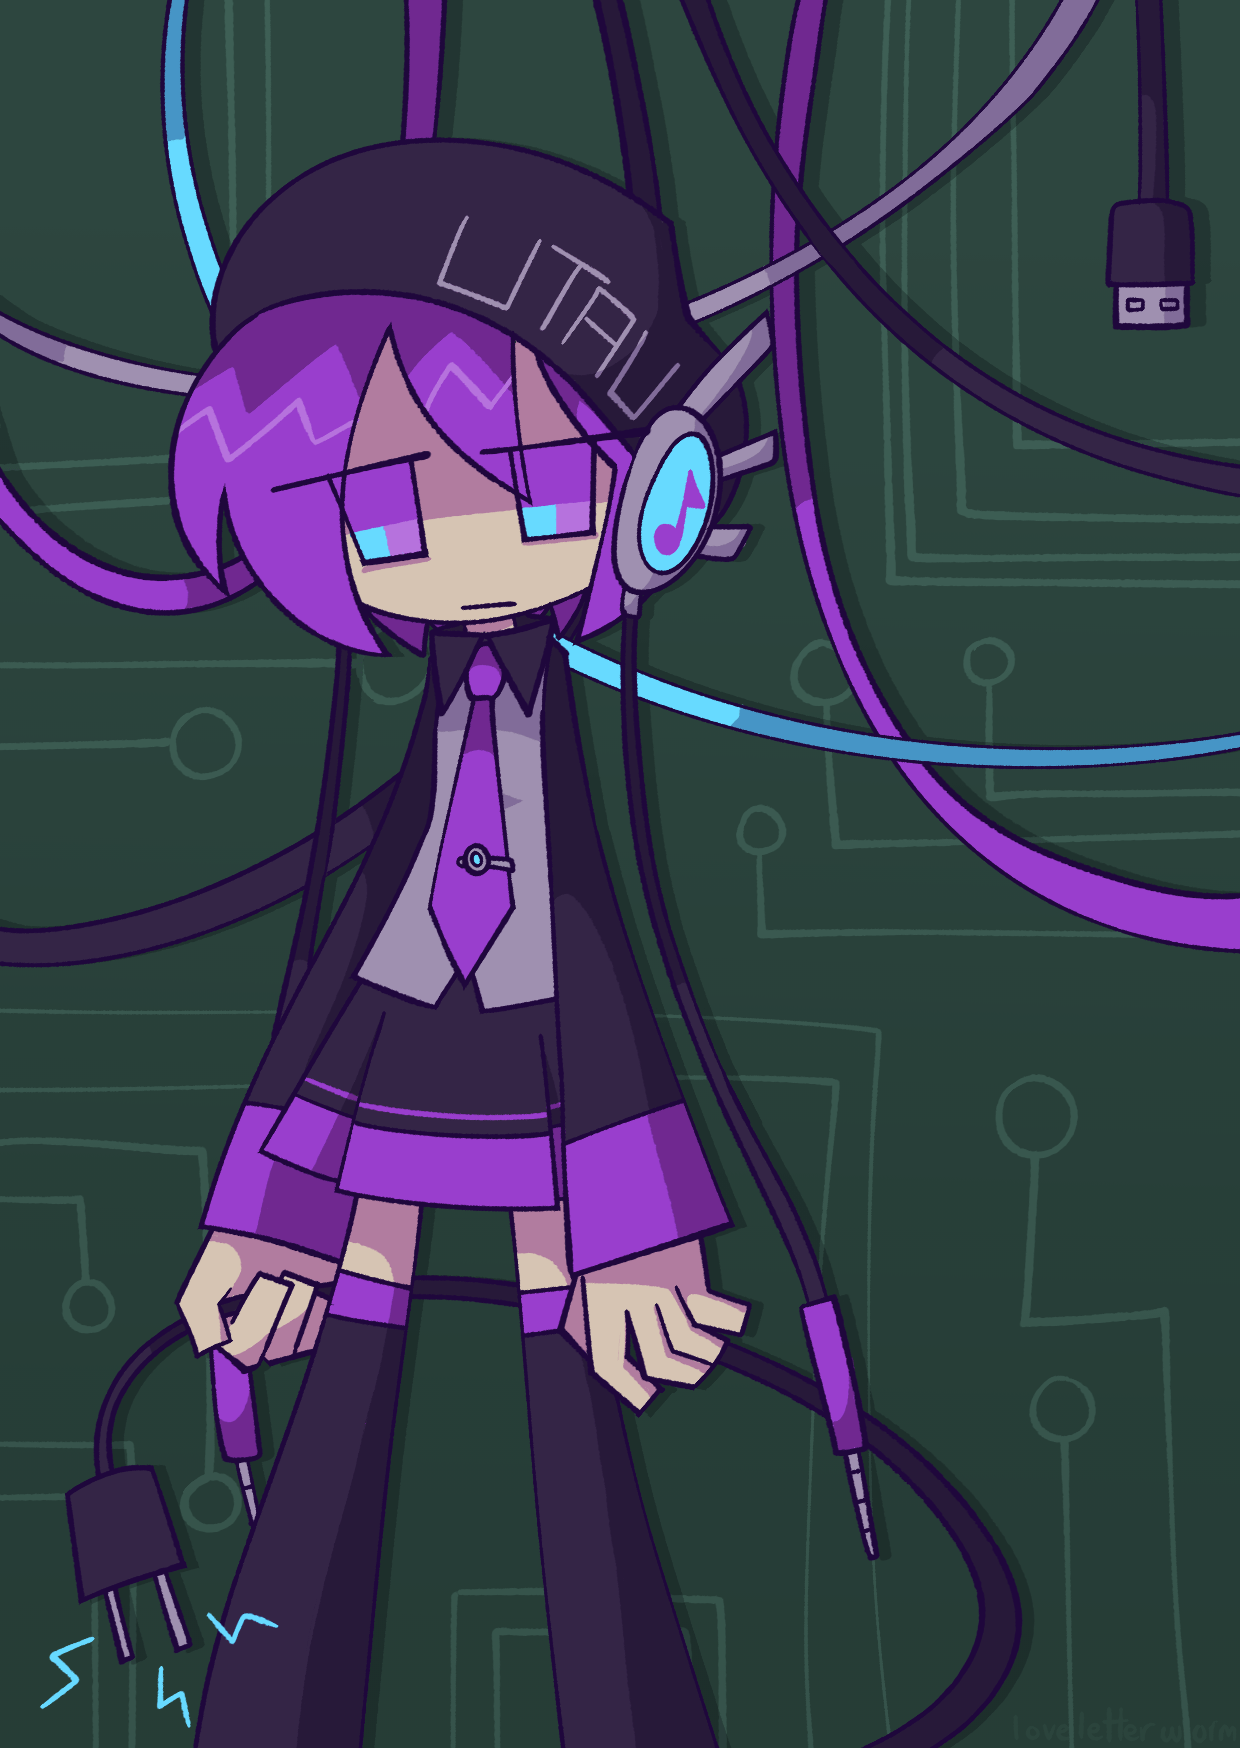 A drawing of the UTAU Defoko. She is standing against a background resembling a circuitboard, with purple, grey, blue and black wires dangling behind her. She has a deadpan expression and is loosely holding a power cord, which has small blue sparks emitting from it.